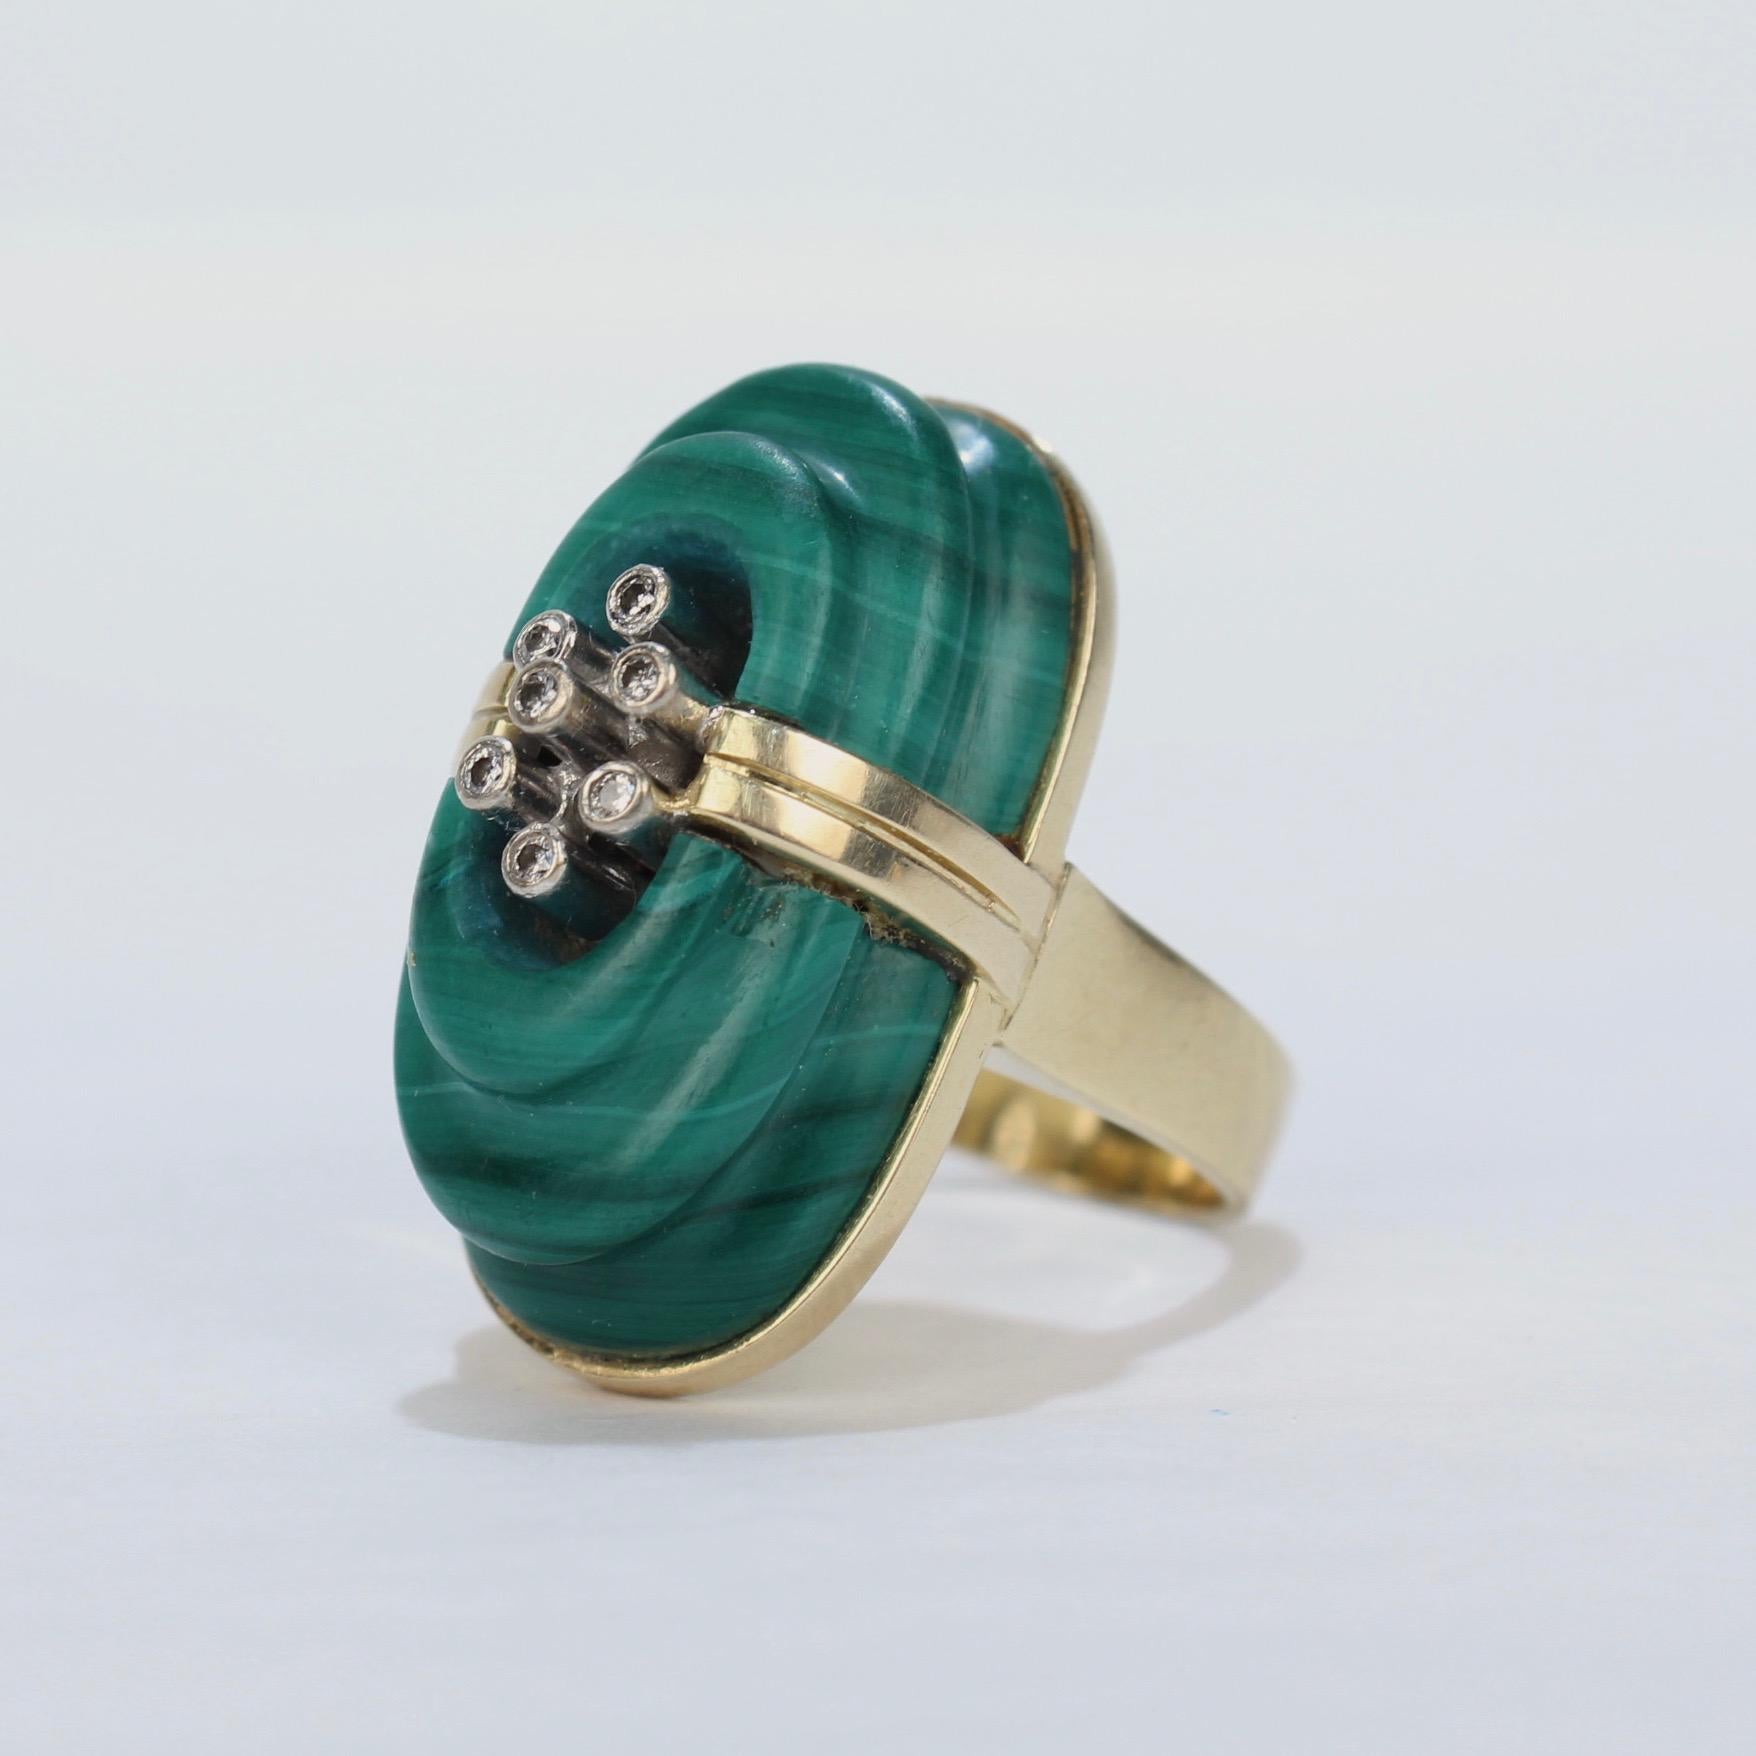 An exciting, retro cocktail ring in 14k gold, malachite and diamonds.

Set with a large, stepped malachite stone and 7 bezel set diamonds. 

Simply a very cool, retro ring with great style! Lots of fun to wear!!

Marked to the shank 14k for gold